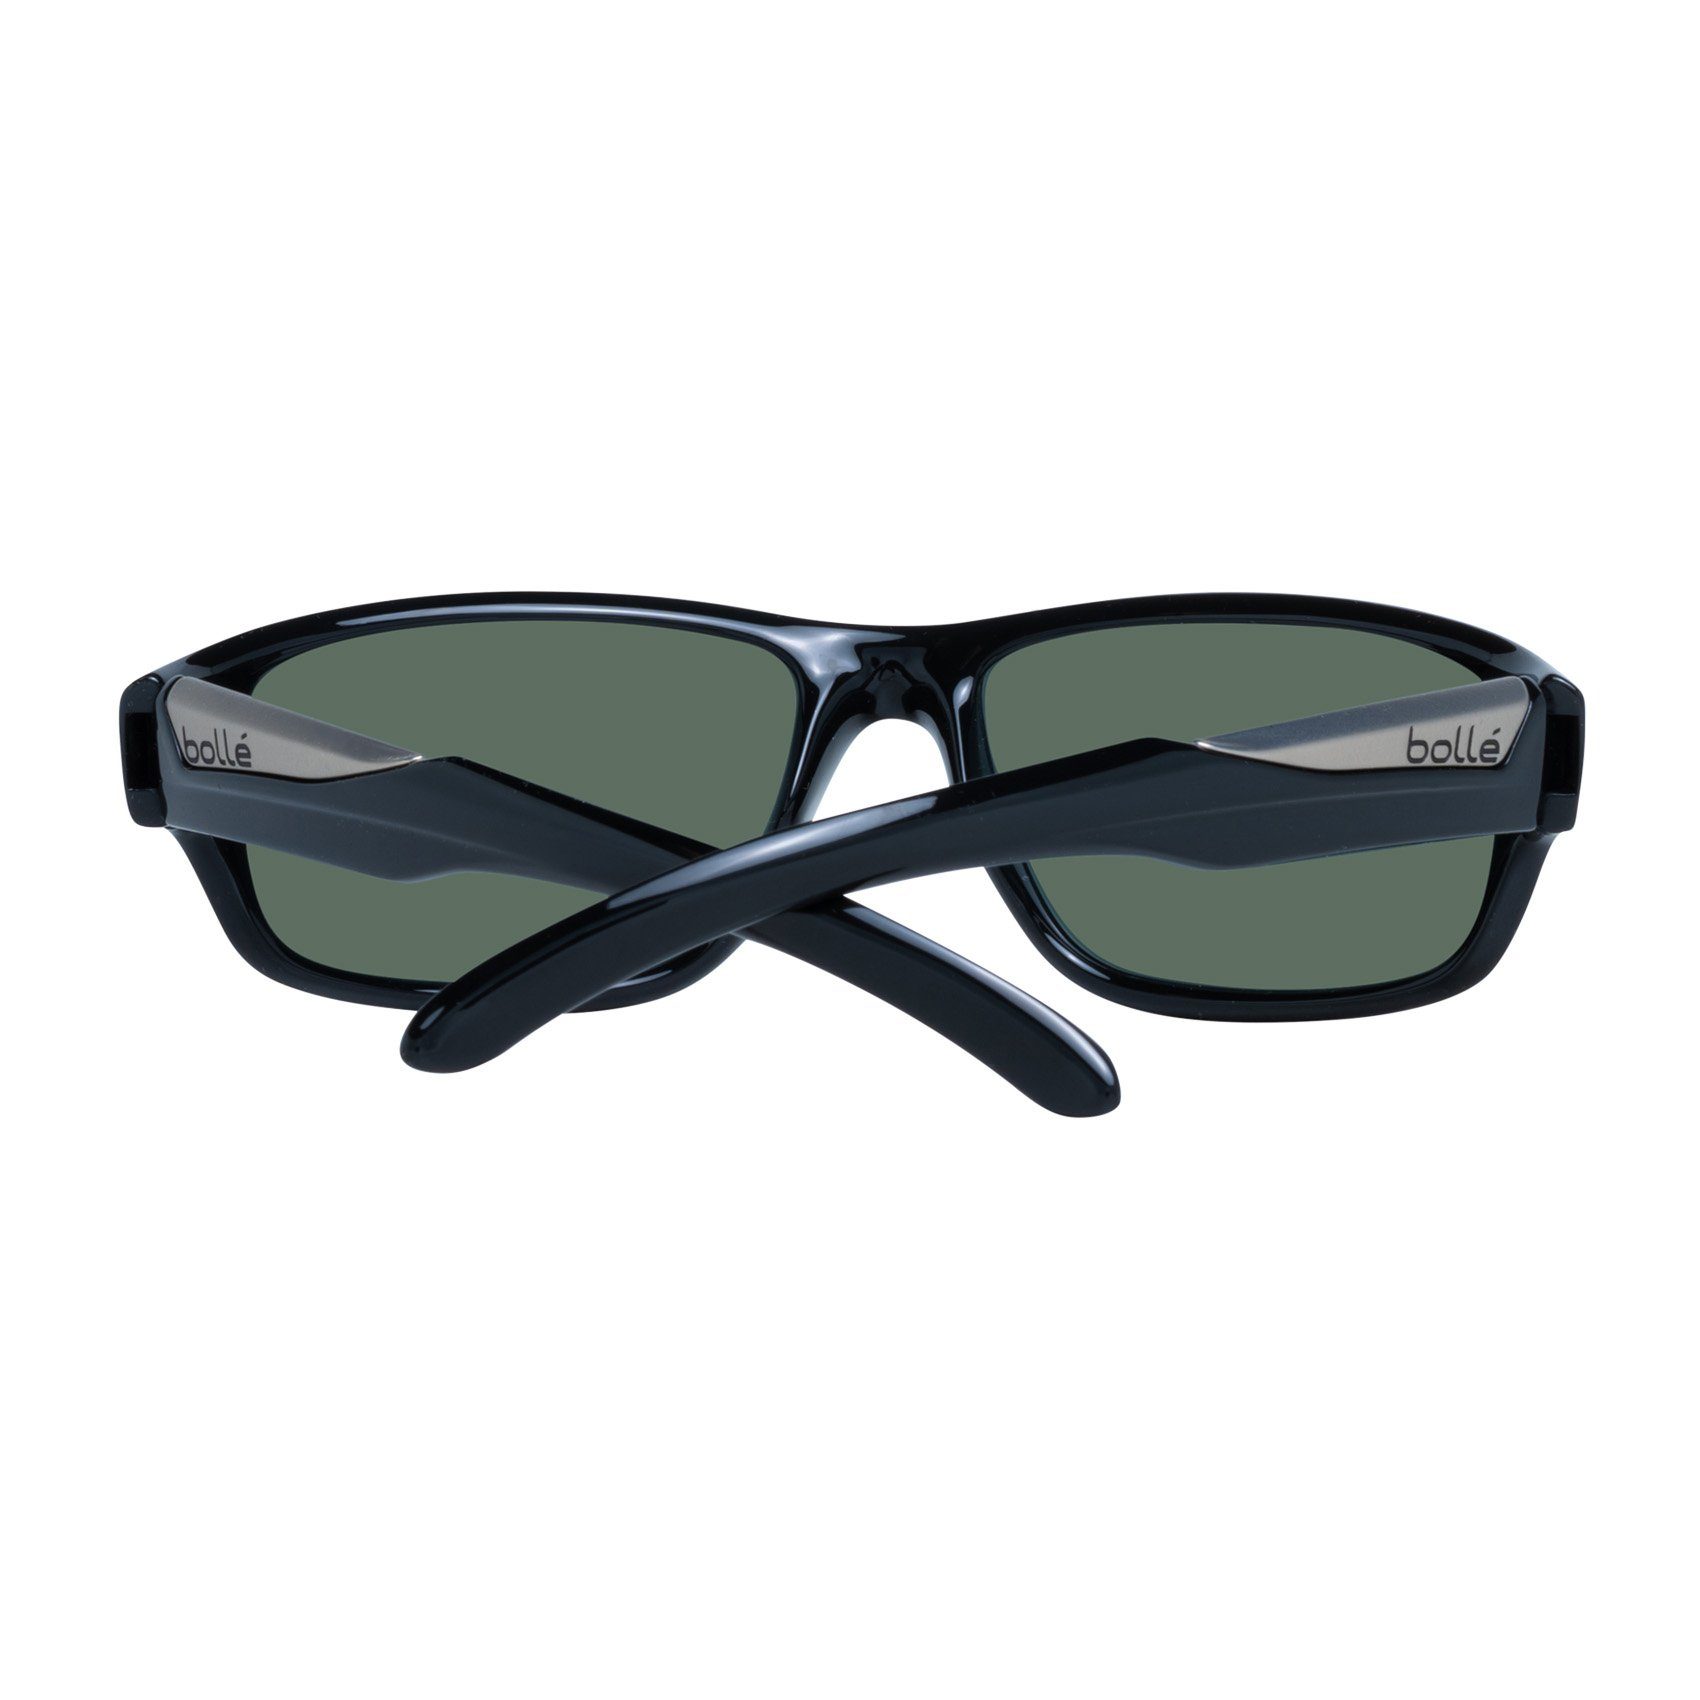 Bolle Sonnenbrille Vibe 59 Italy in Made Black 11651 Shiny